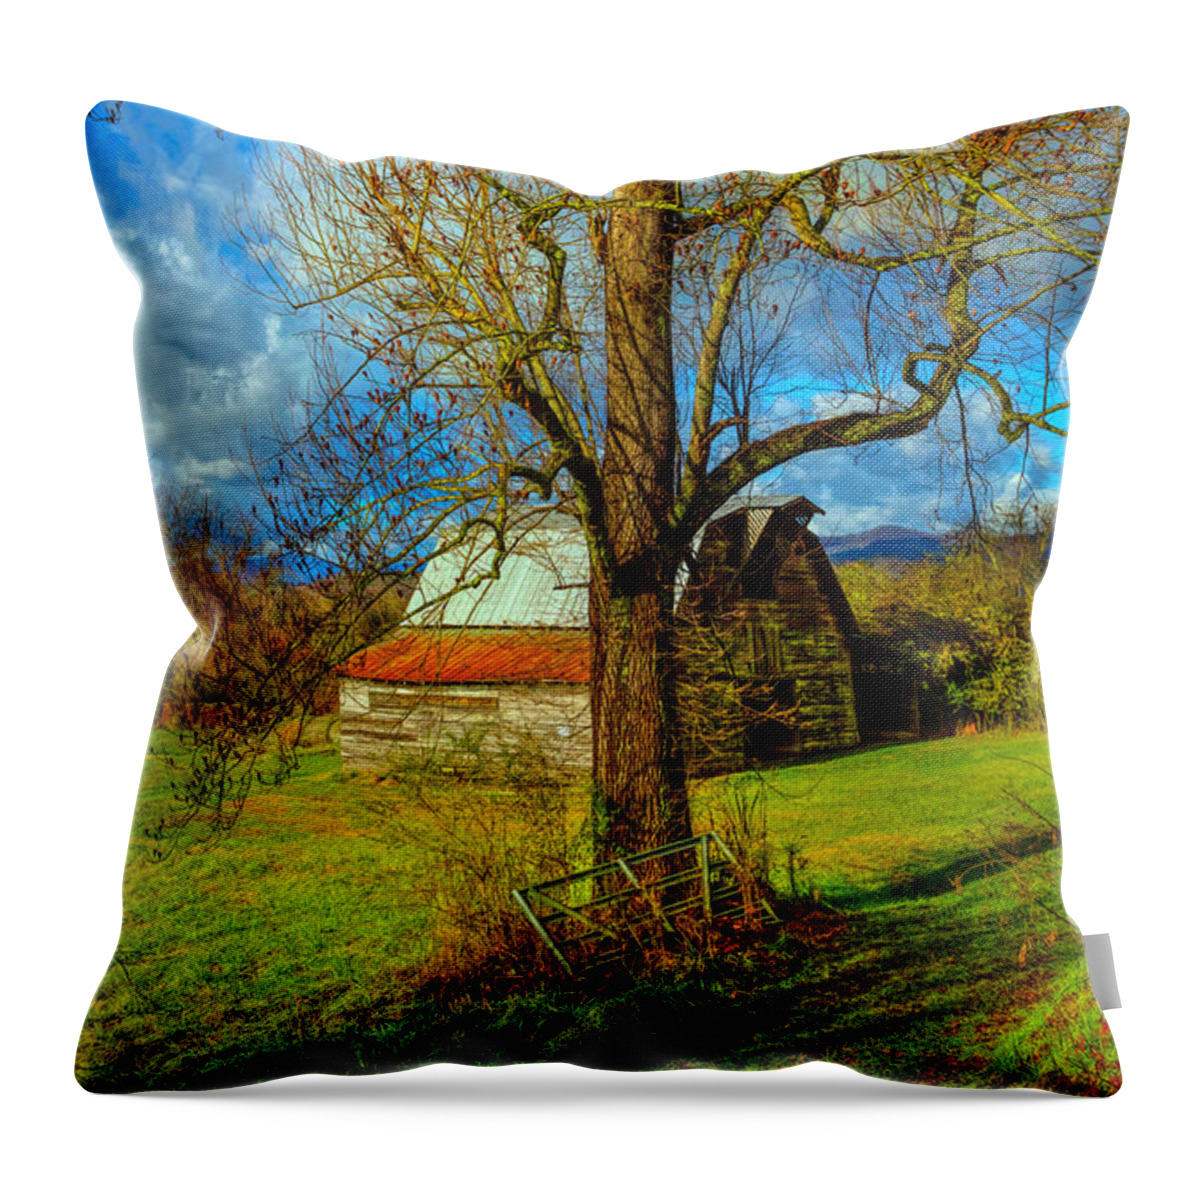 Andrews Throw Pillow featuring the photograph The Barn Farm Gate by Debra and Dave Vanderlaan